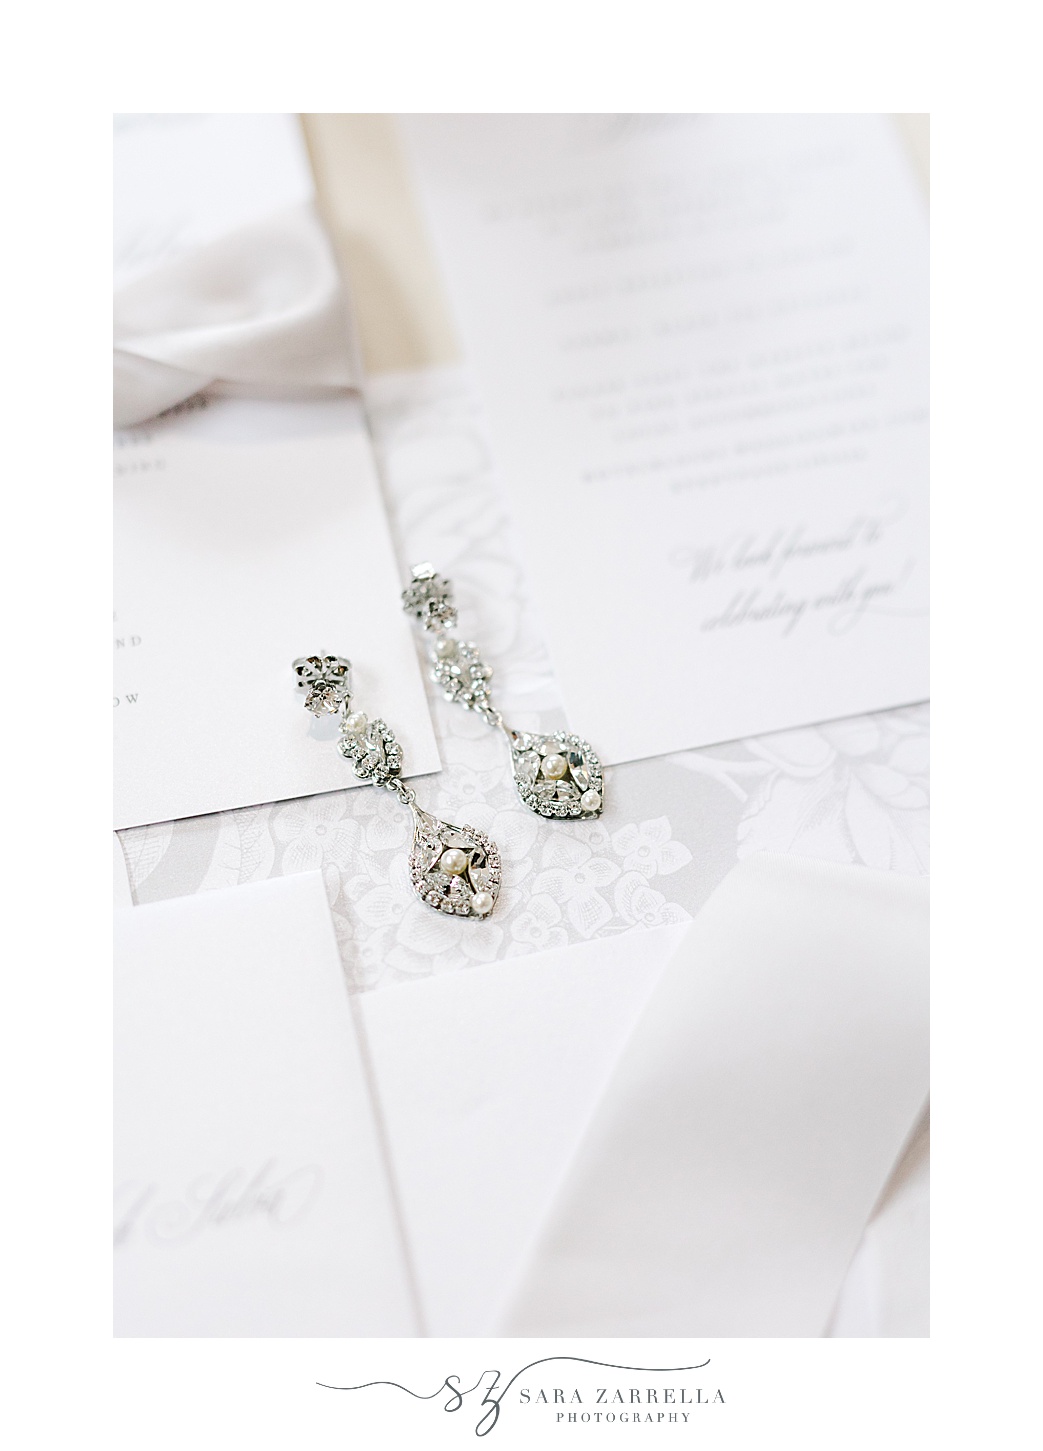 diamond earrings rest on invitation suite at Rosecliff Mansion